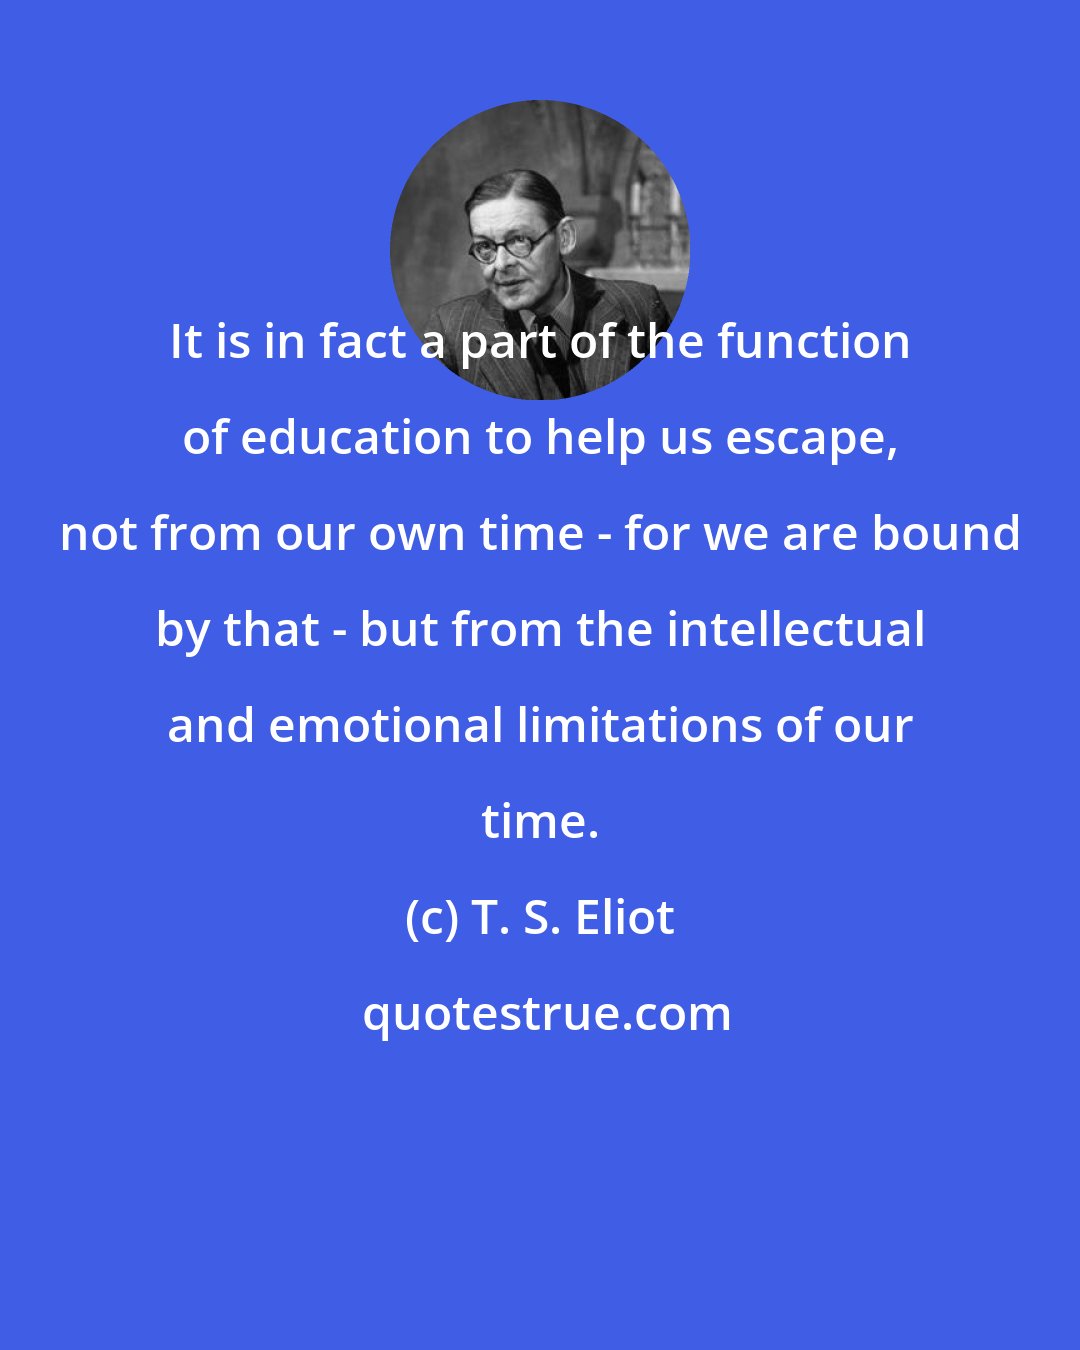 T. S. Eliot: It is in fact a part of the function of education to help us escape, not from our own time - for we are bound by that - but from the intellectual and emotional limitations of our time.